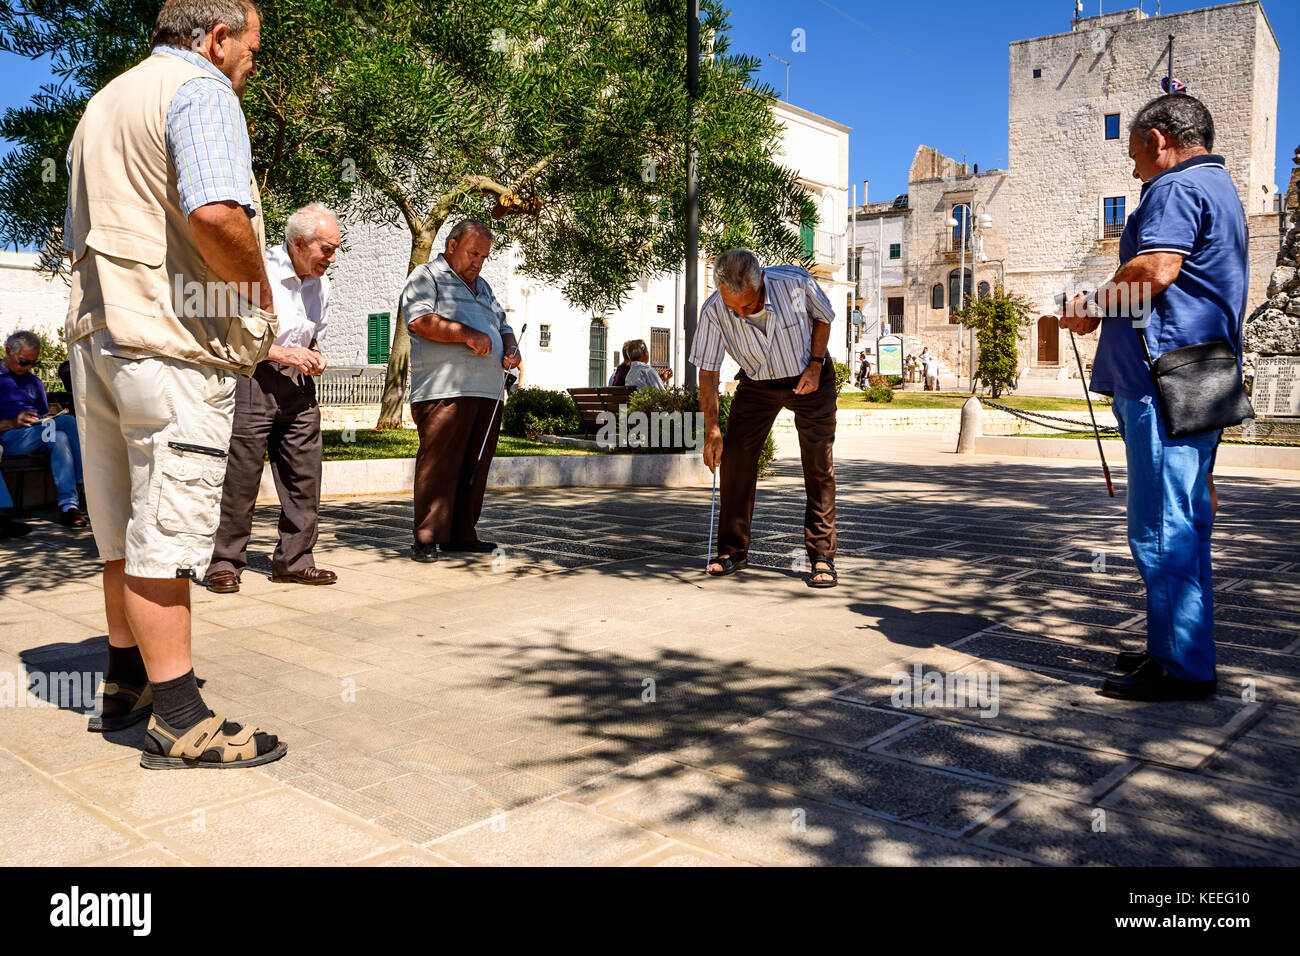 Cisternino, Italy - August 15, 2017: Retired people play in the square Stock Photo